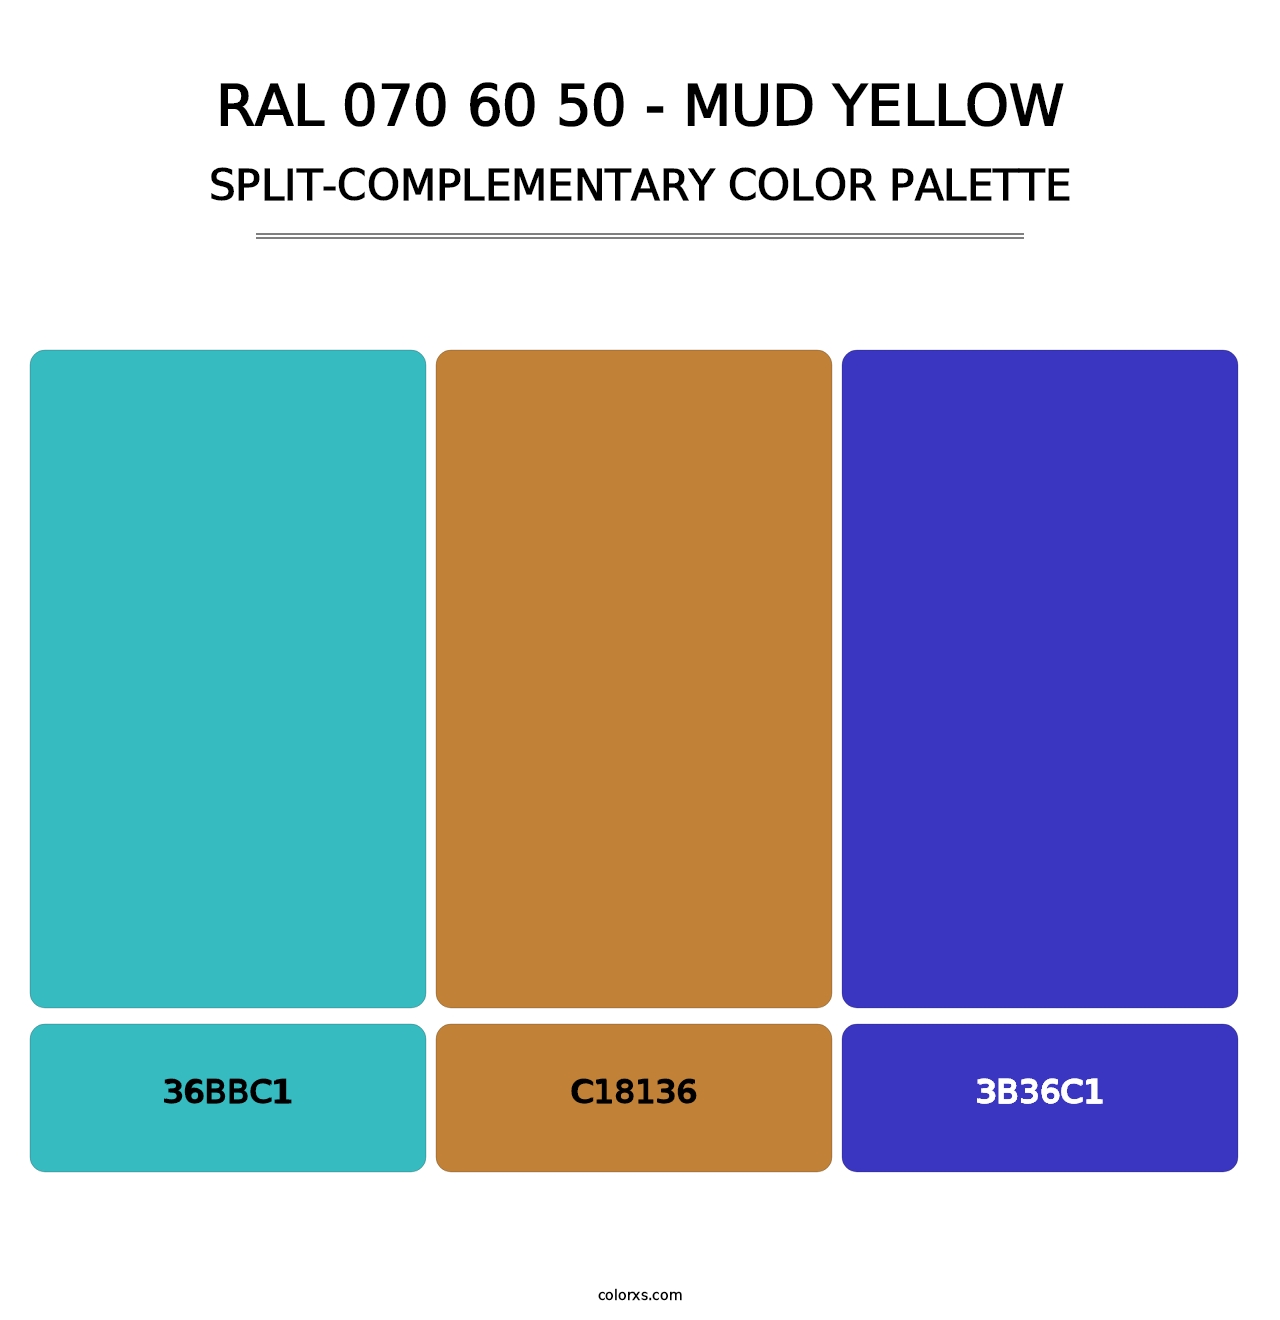 RAL 070 60 50 - Mud Yellow - Split-Complementary Color Palette